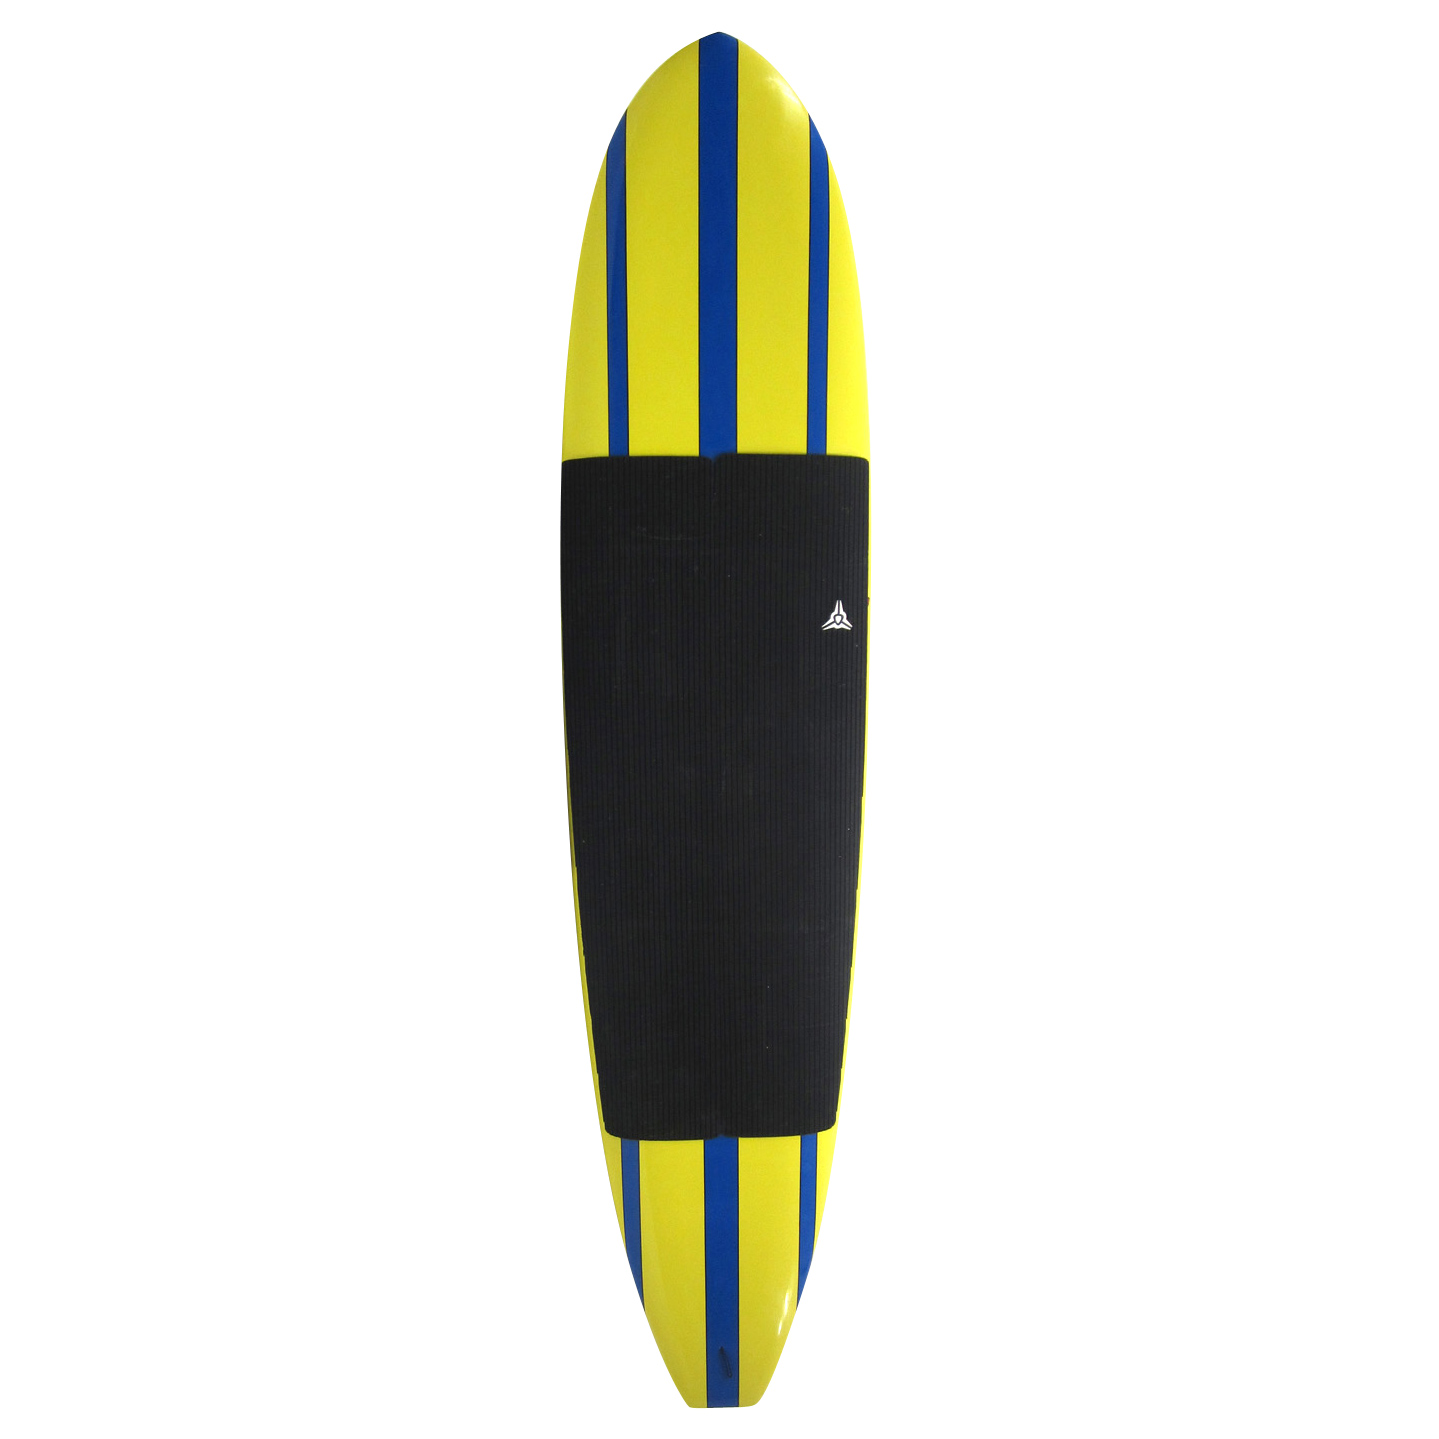  / LAIRD HAMILTON / 10`0 Stand Up Paddle  Laird Hamilton Model Surftech